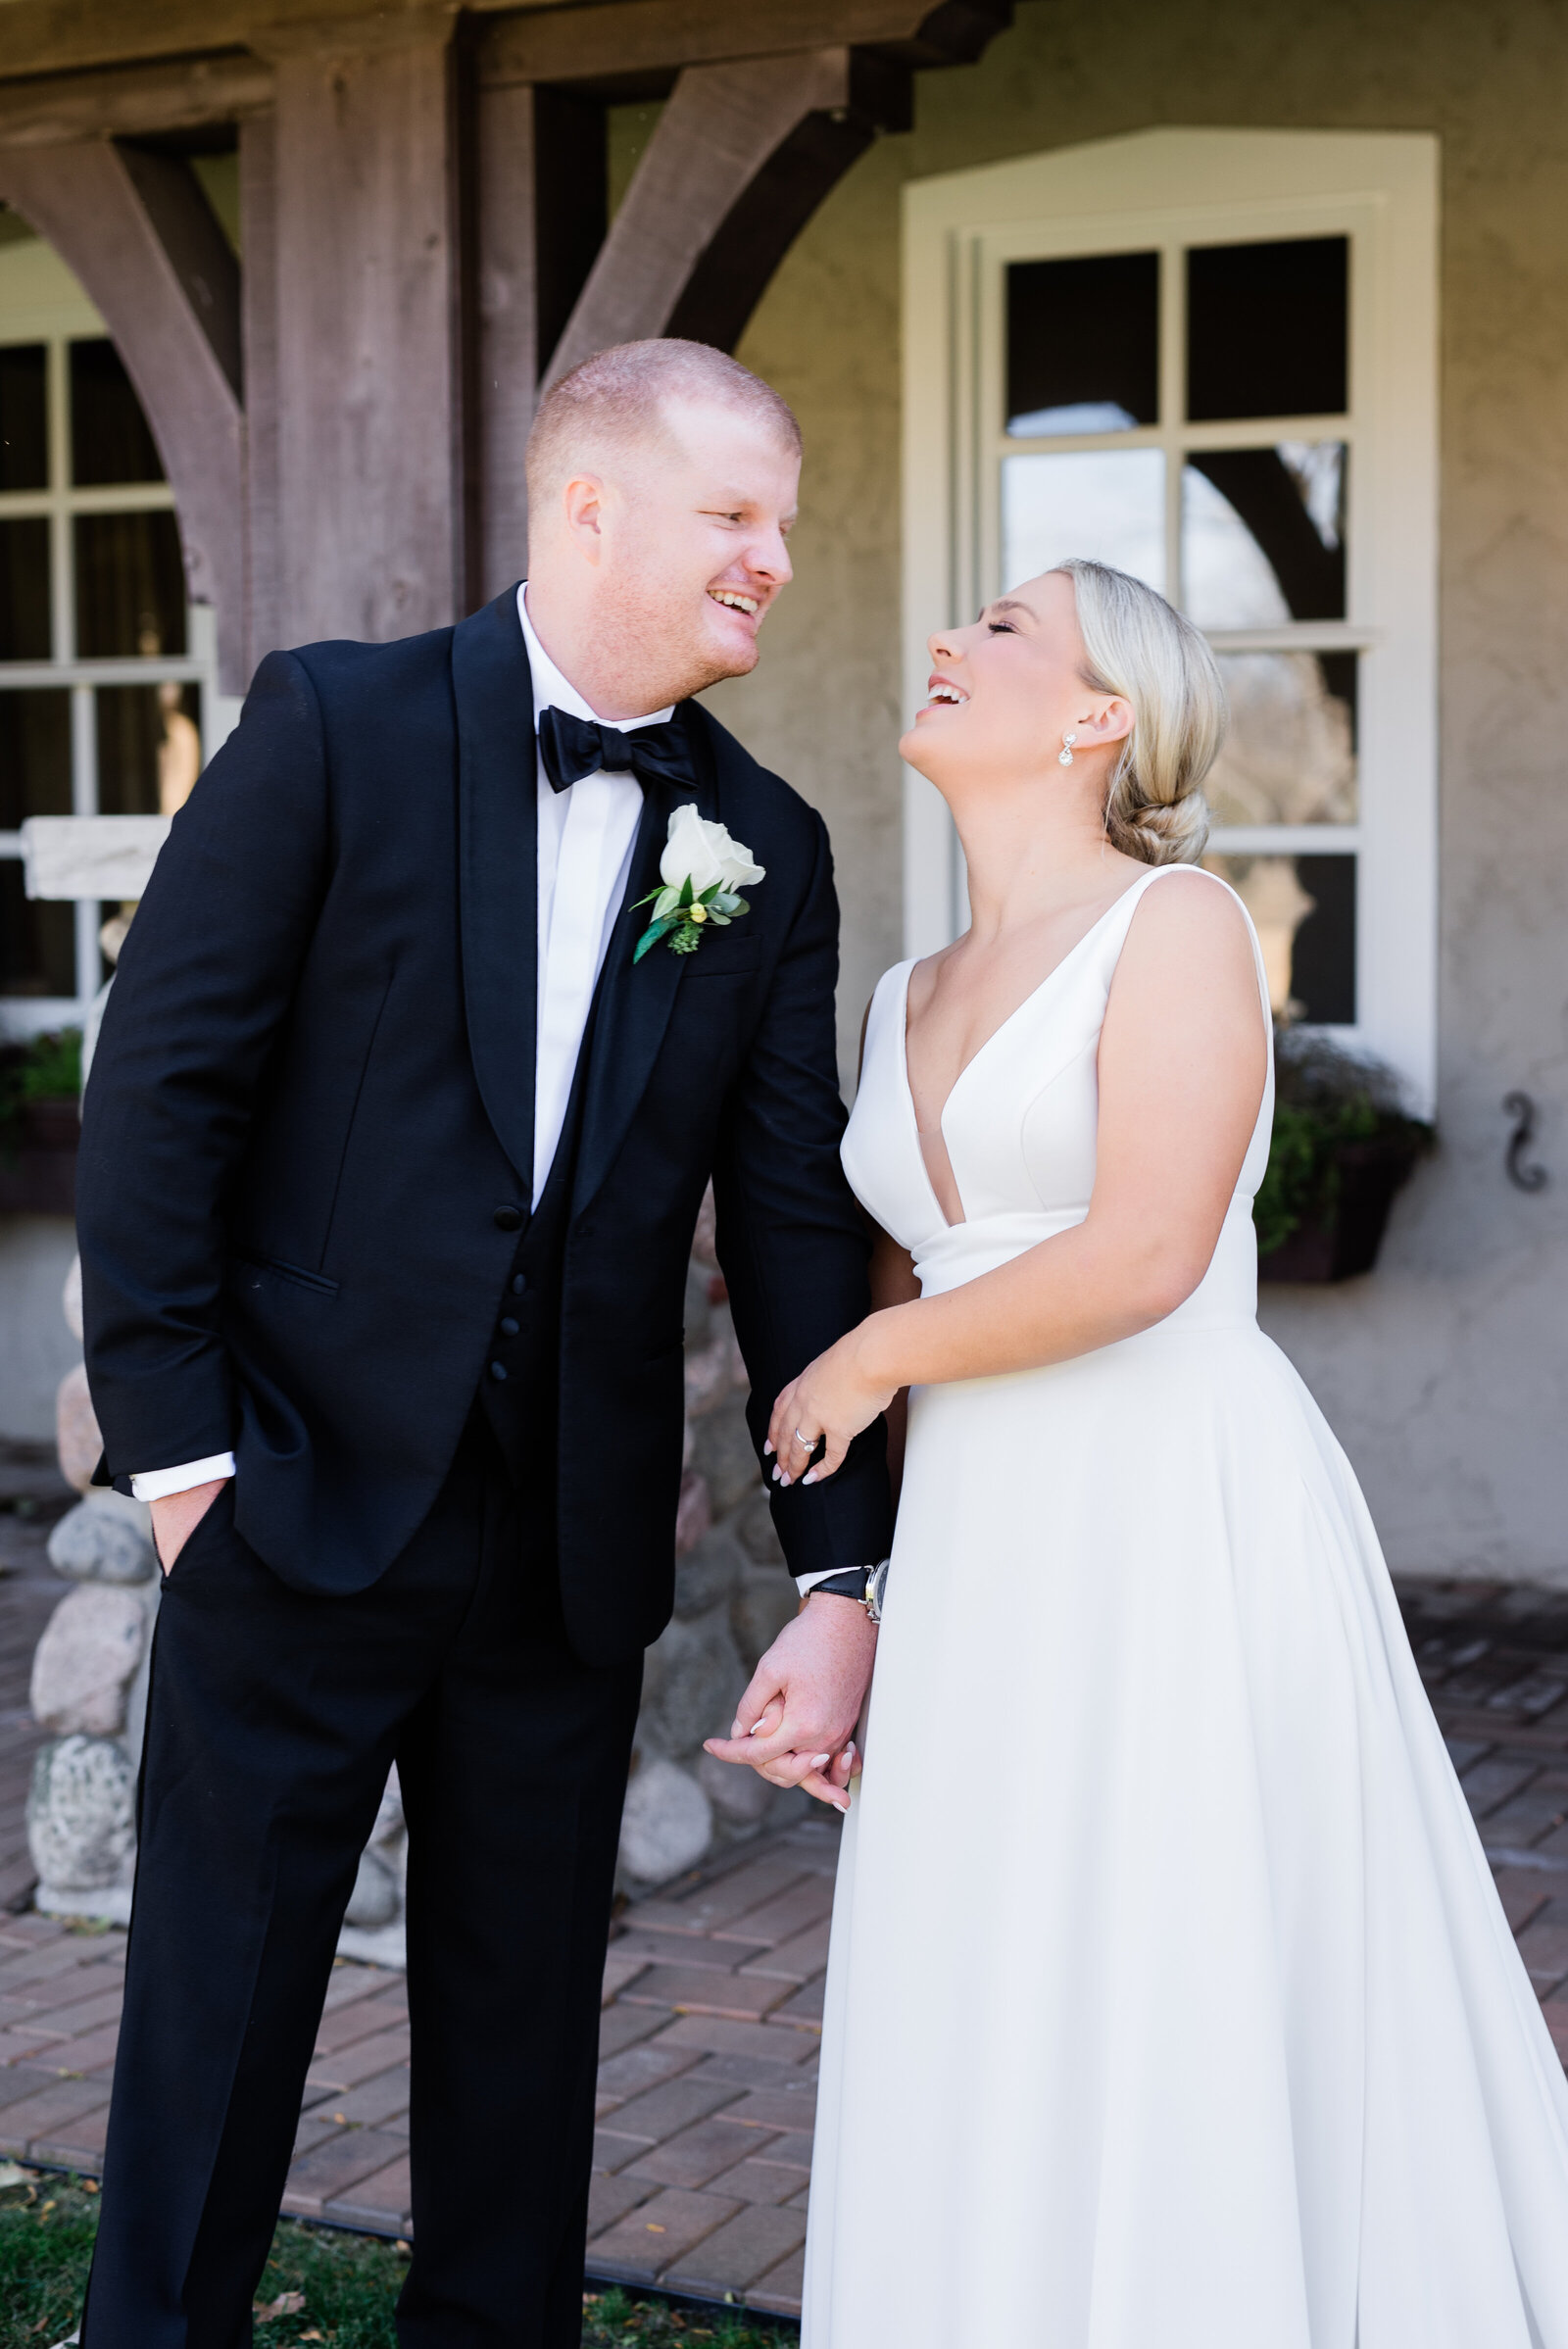 Wedding couple laughing at each other holding hands.